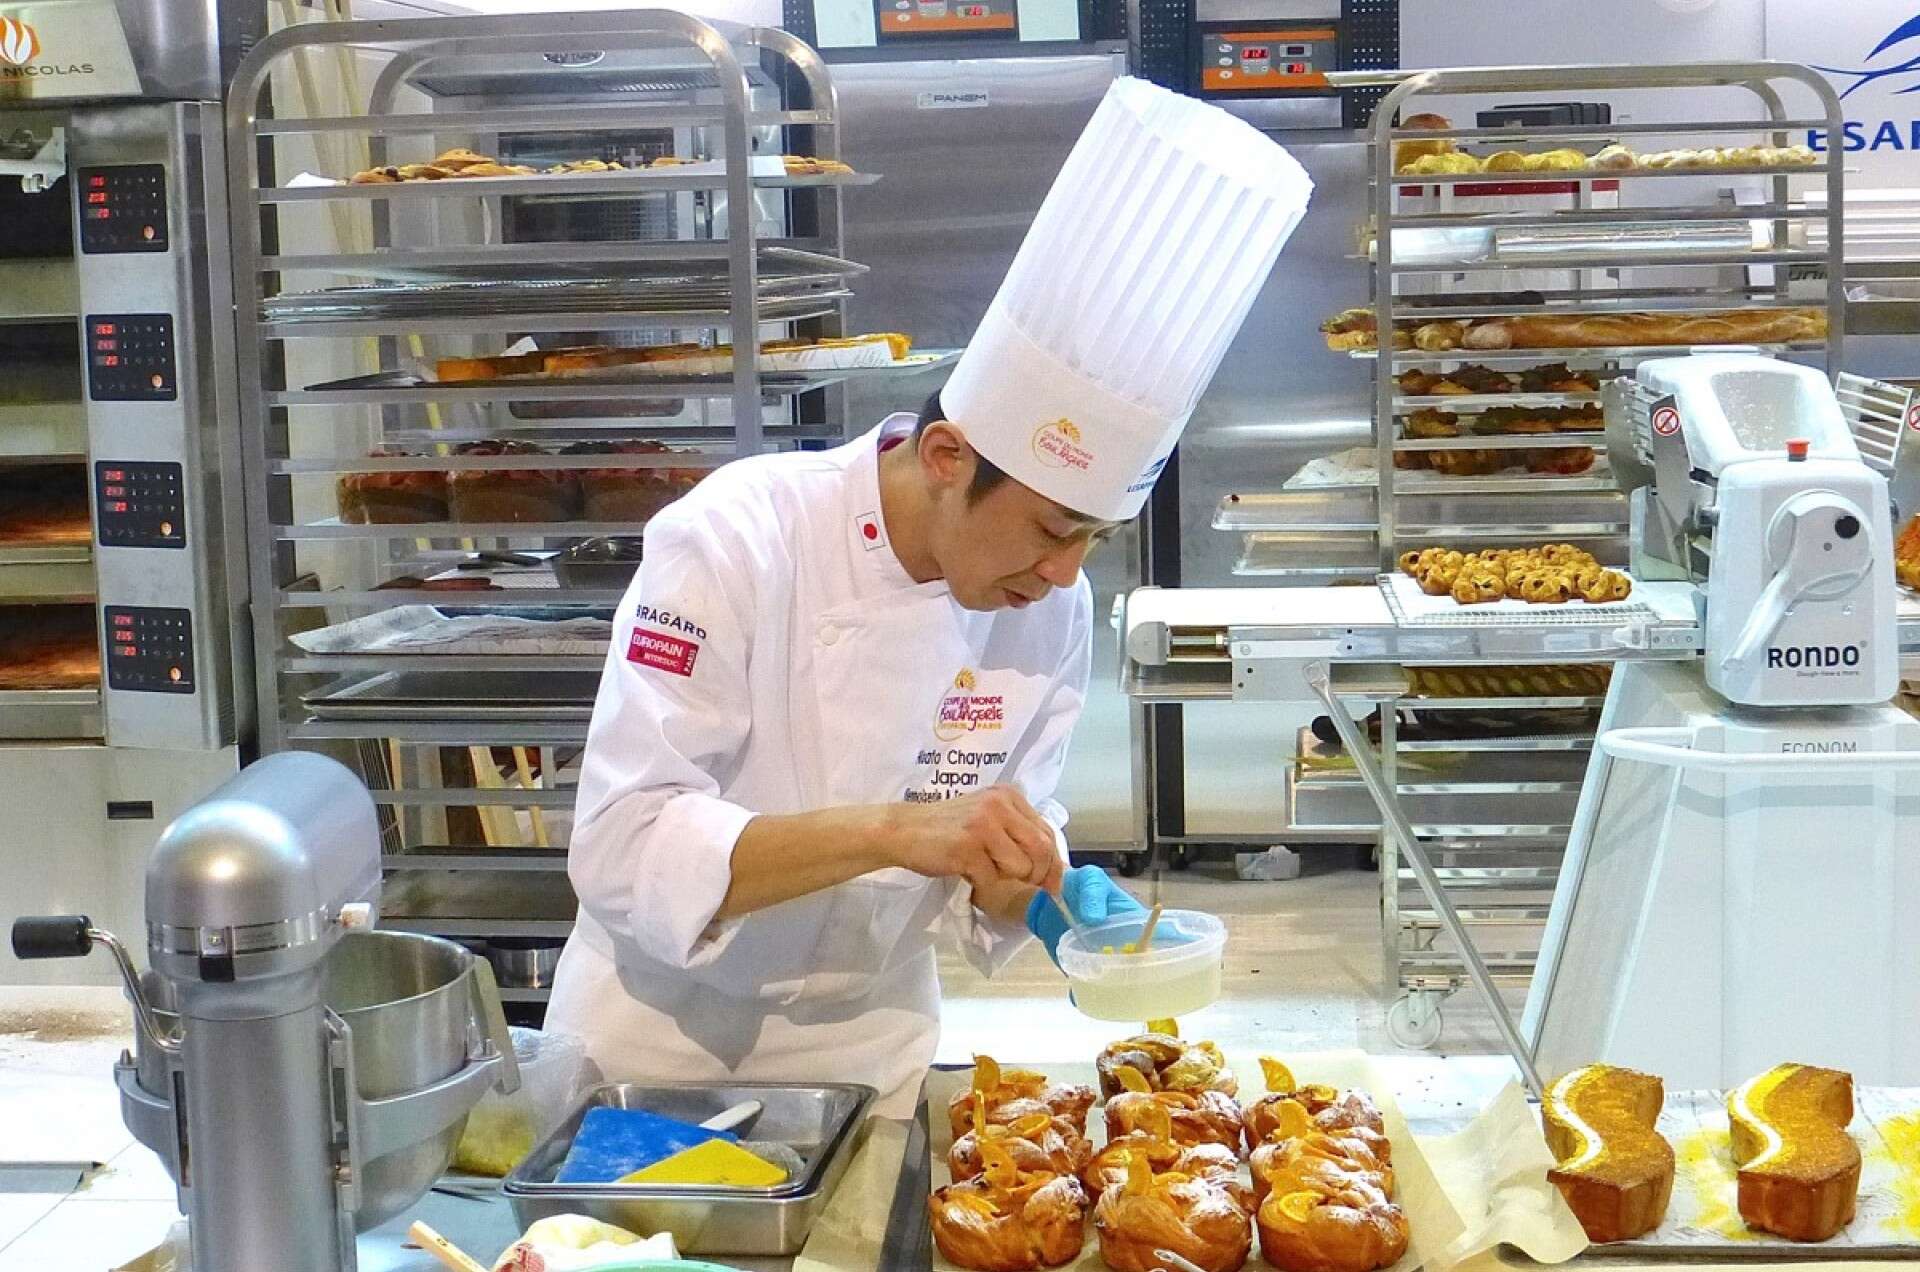 Baker at work during the Coupe